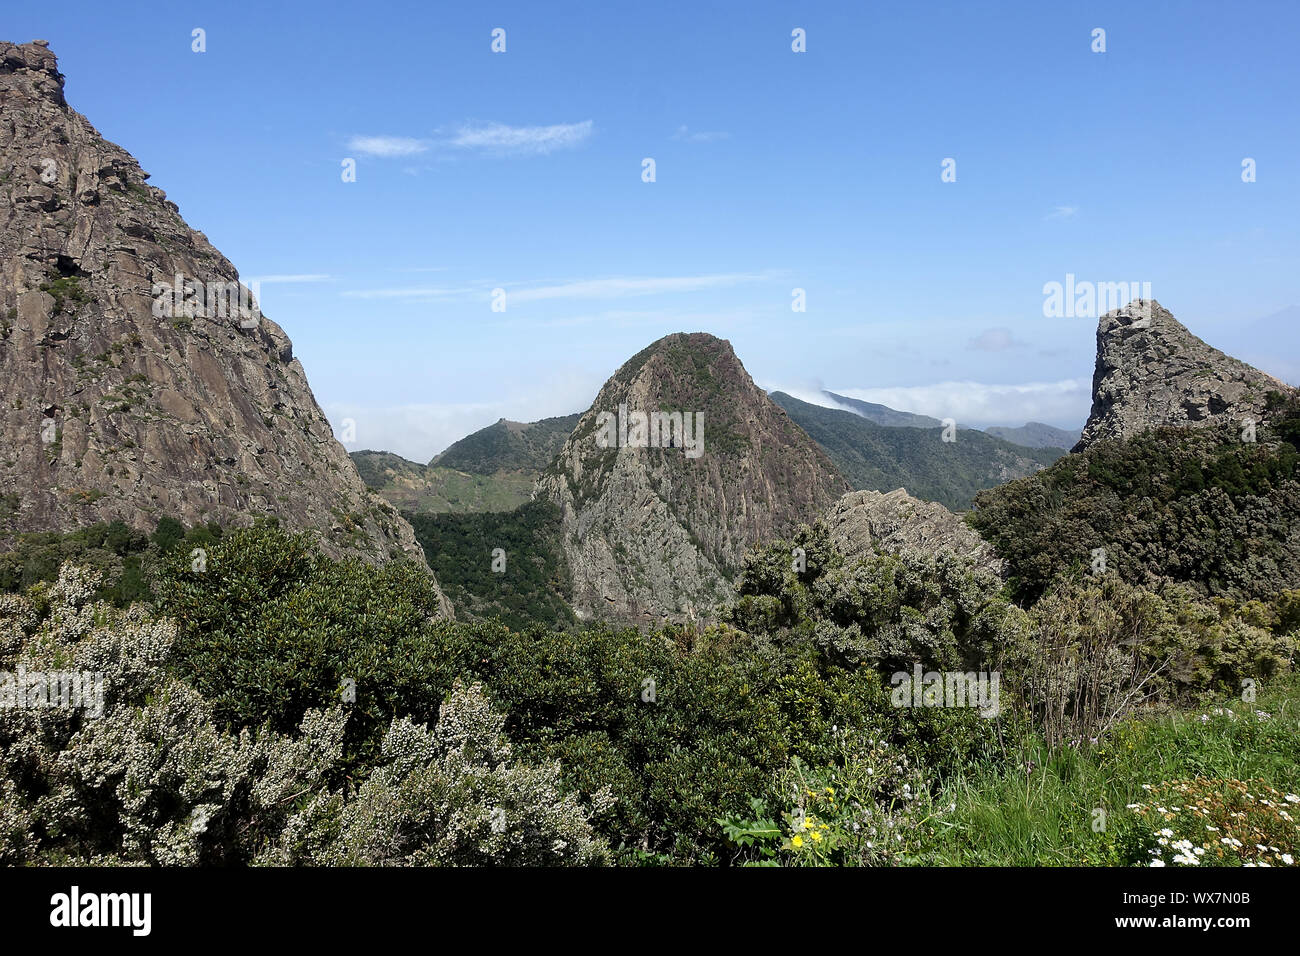 Los Roques natural monument on the Canary Island of La Gomera Stock Photo